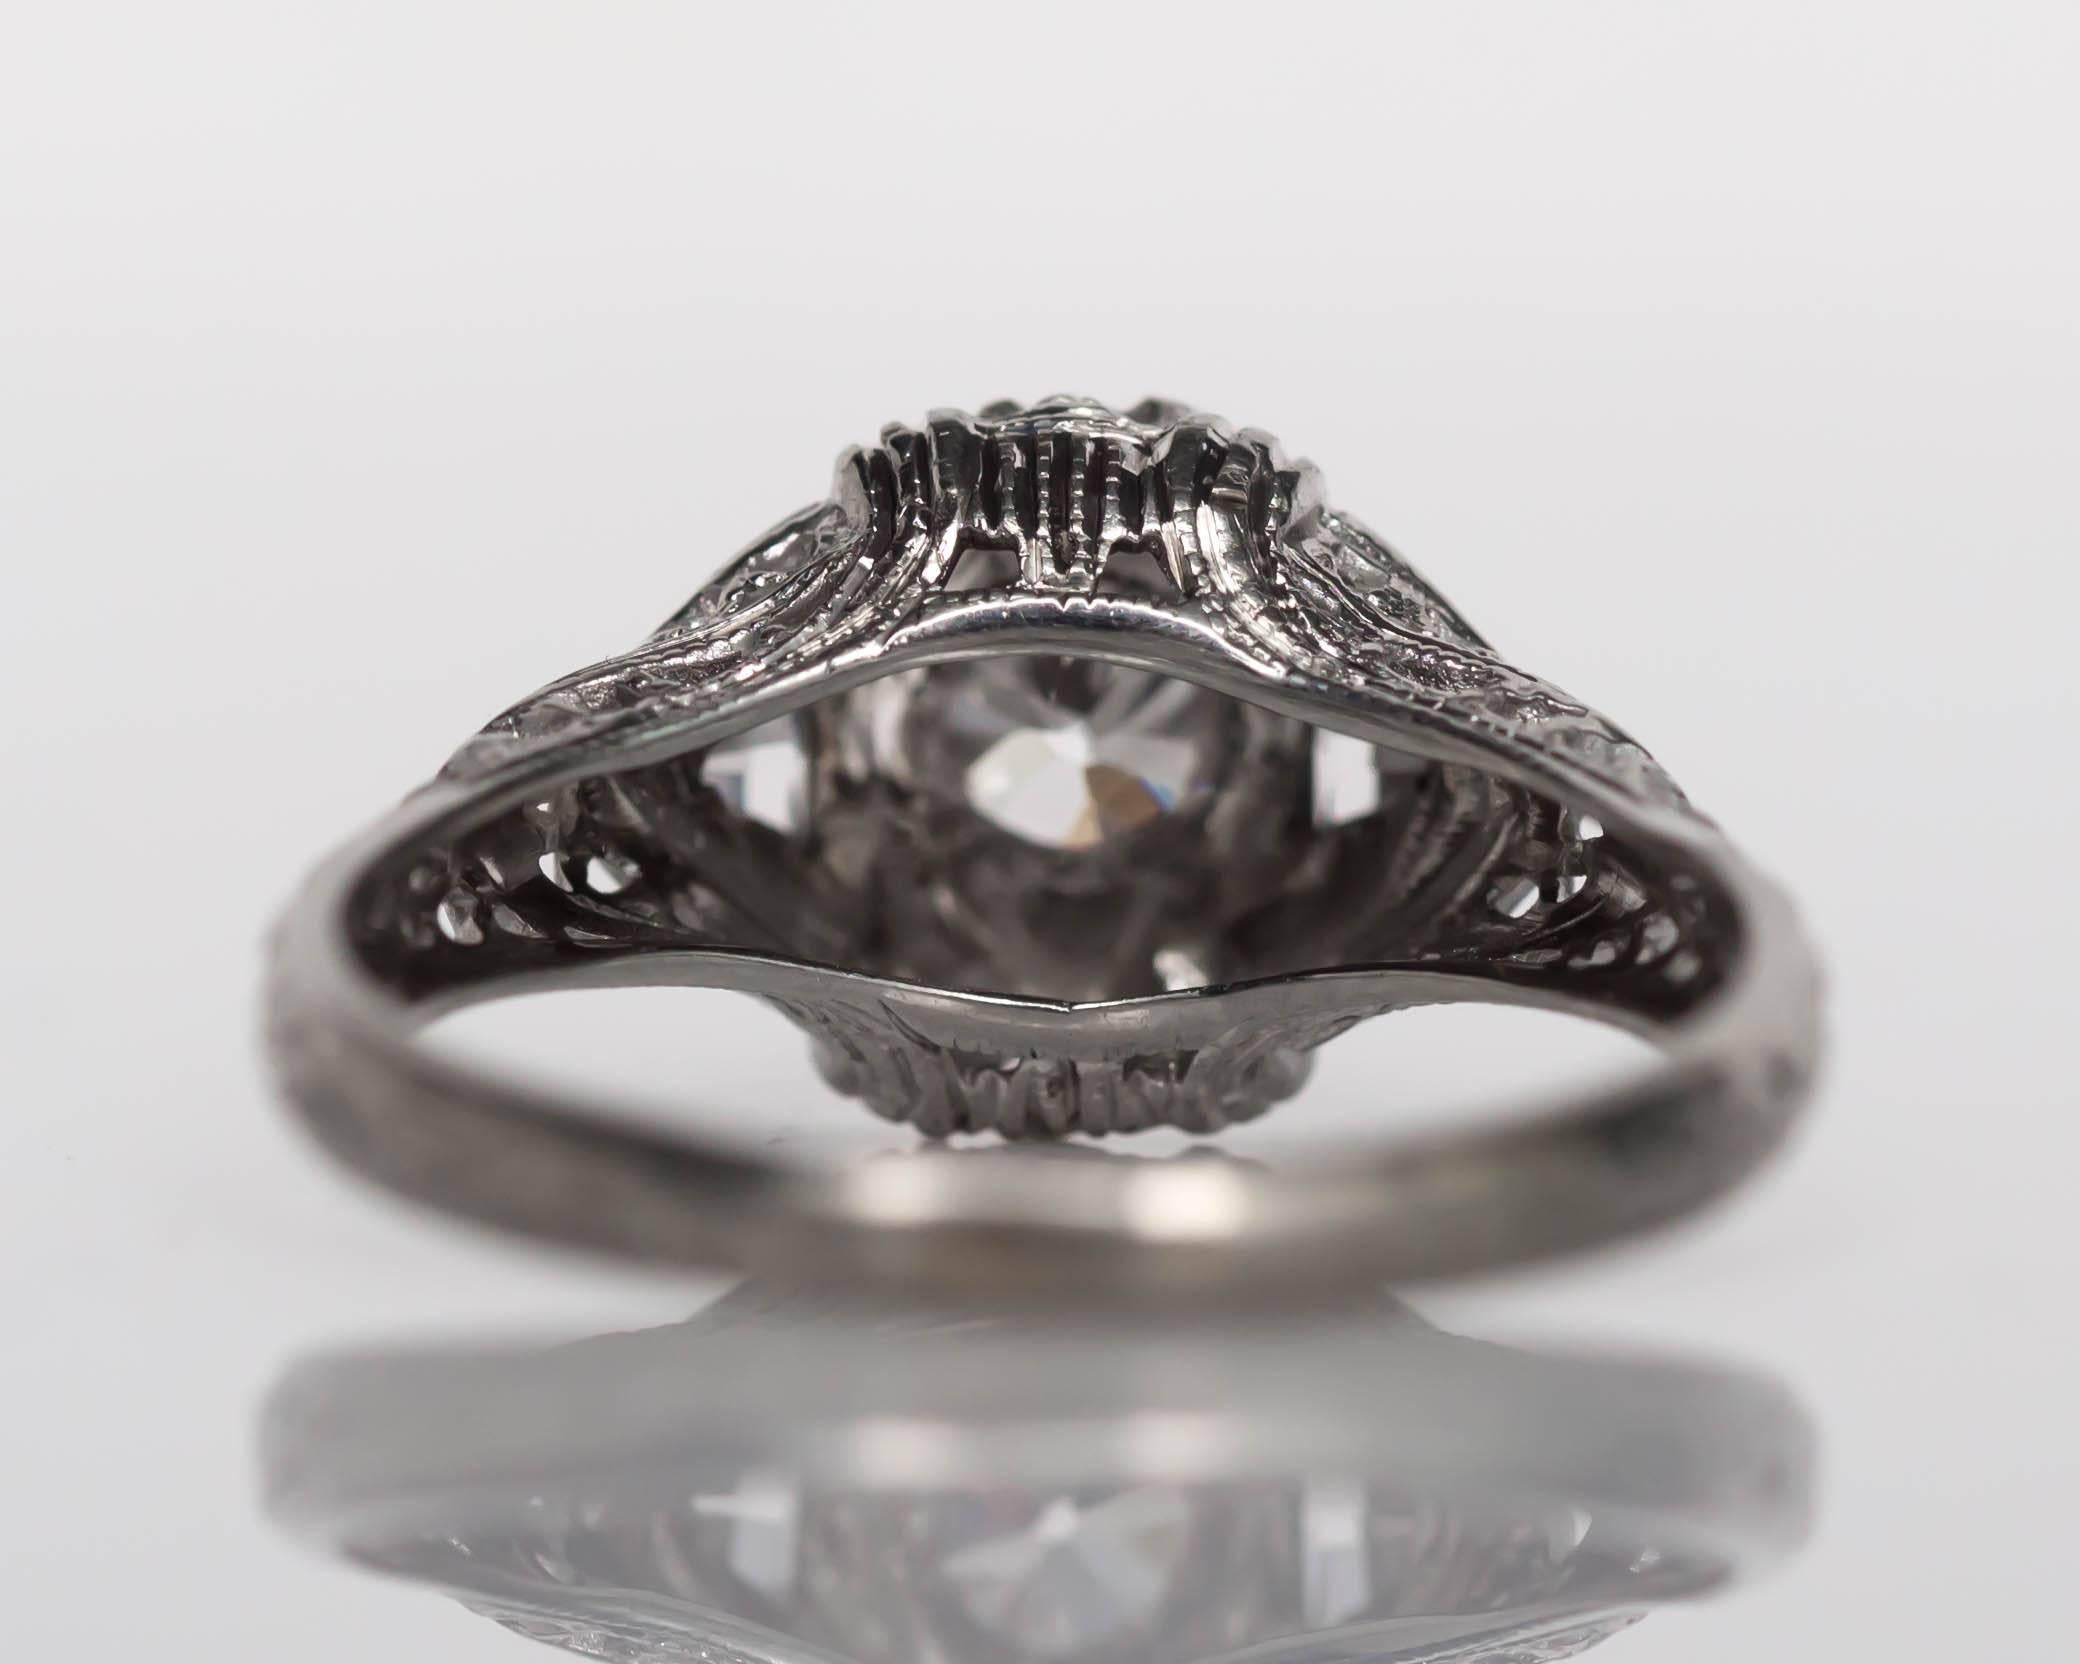 1930s Art Deco GIA Certified .35 Carat Diamond White Gold Engagement Ring In Excellent Condition For Sale In Atlanta, GA